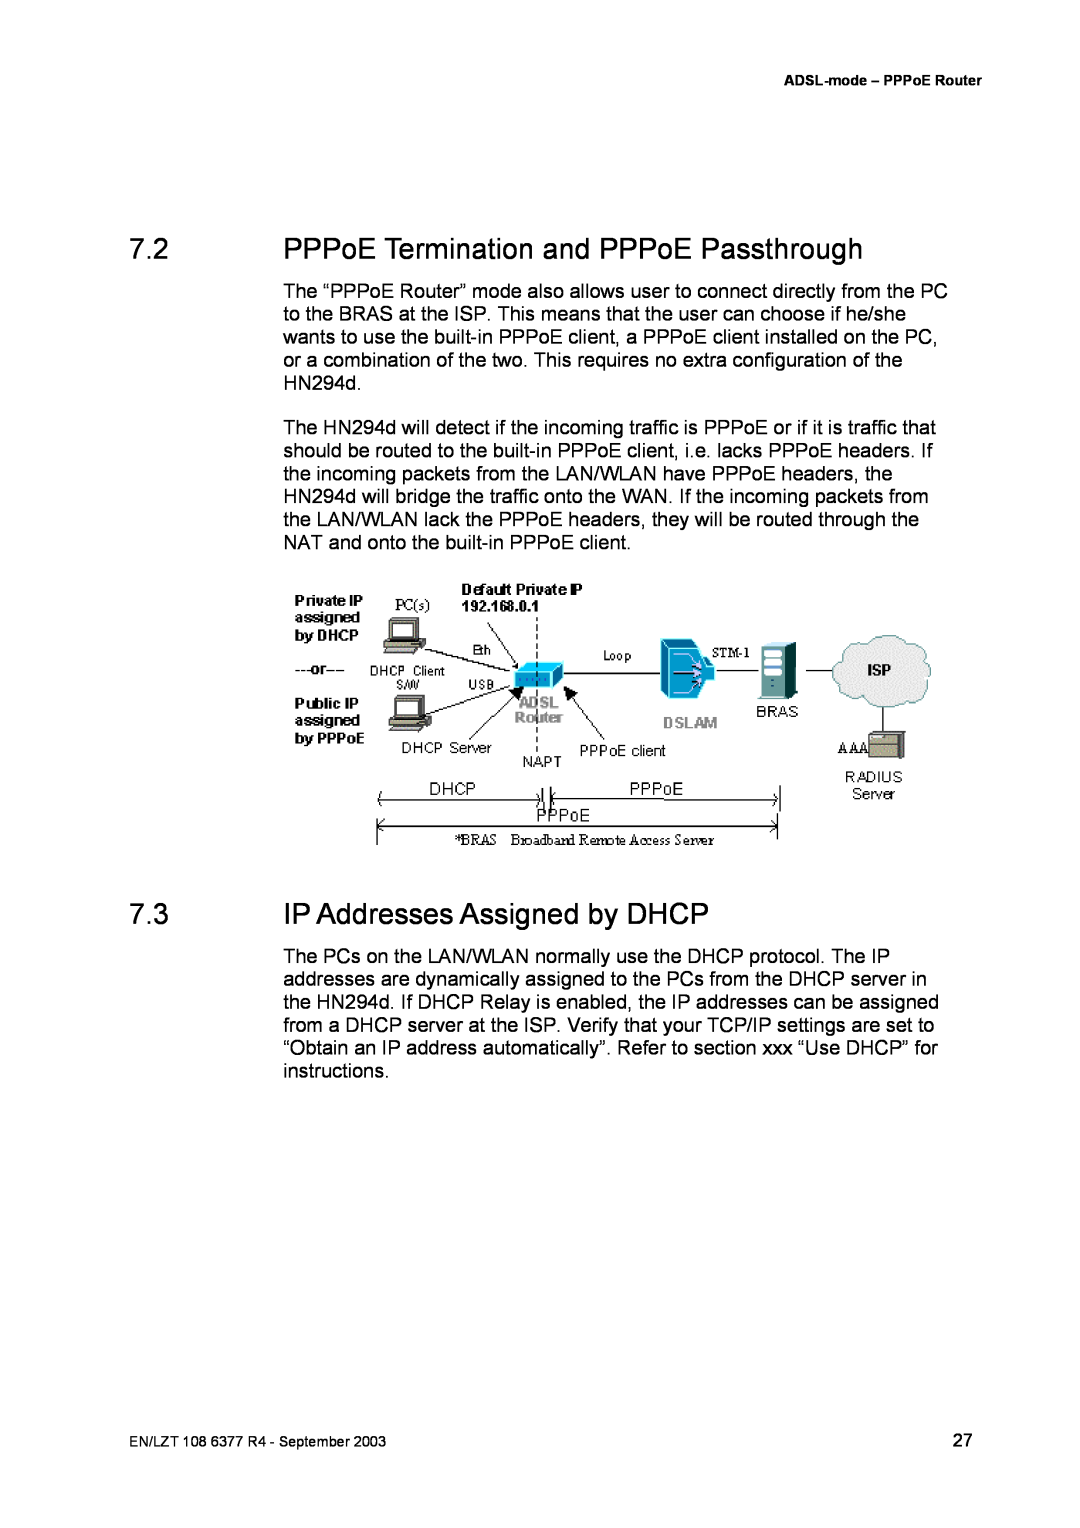 Garmin HN294DP/DI manual PPPoE Termination and PPPoE Passthrough, IP Addresses Assigned by DHCP, ADSL-mode - PPPoE Router 